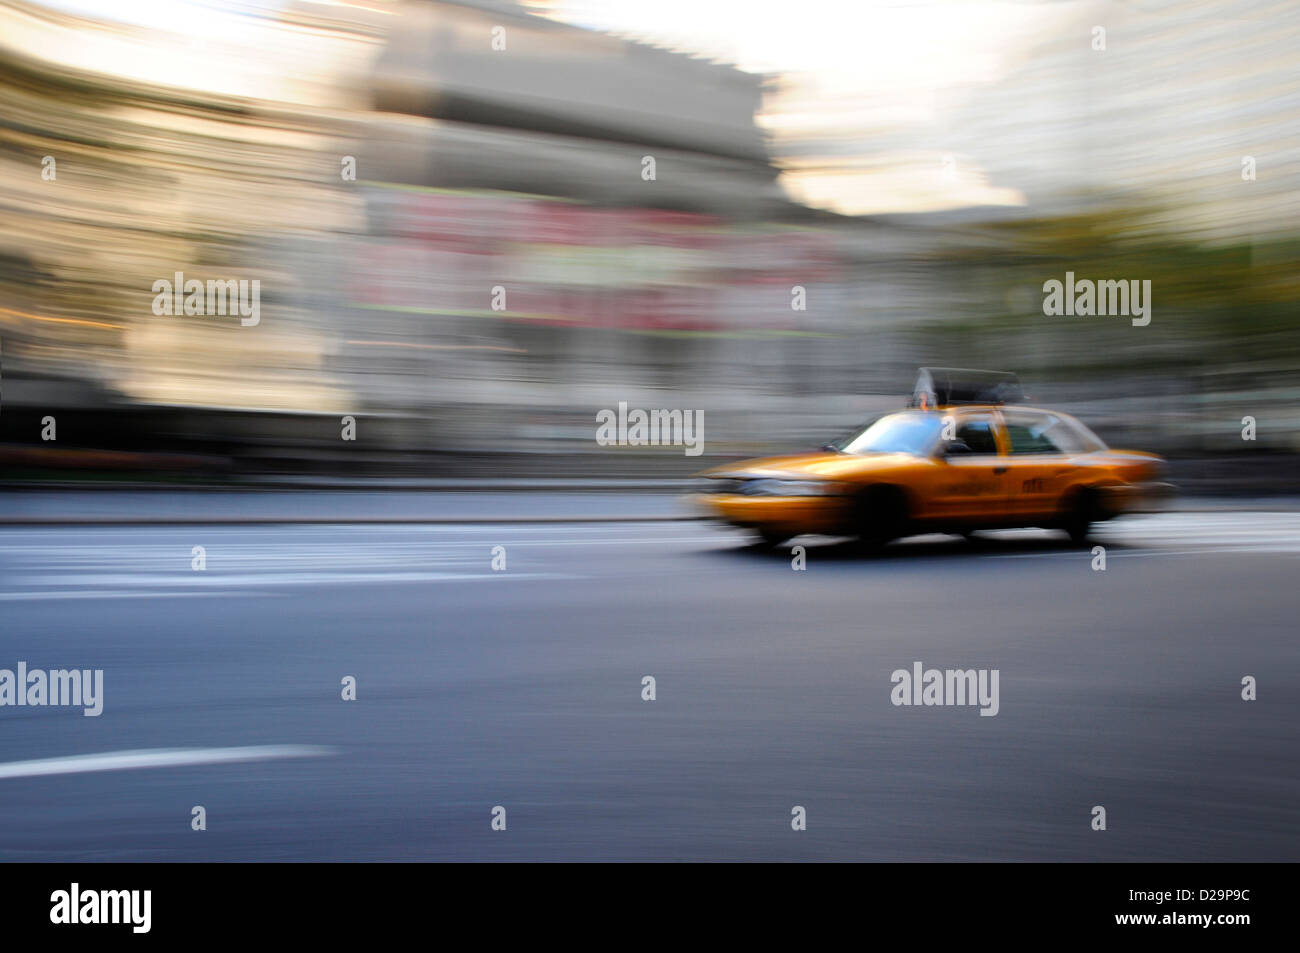 Taxi cab speeding down street in a Stock Photo